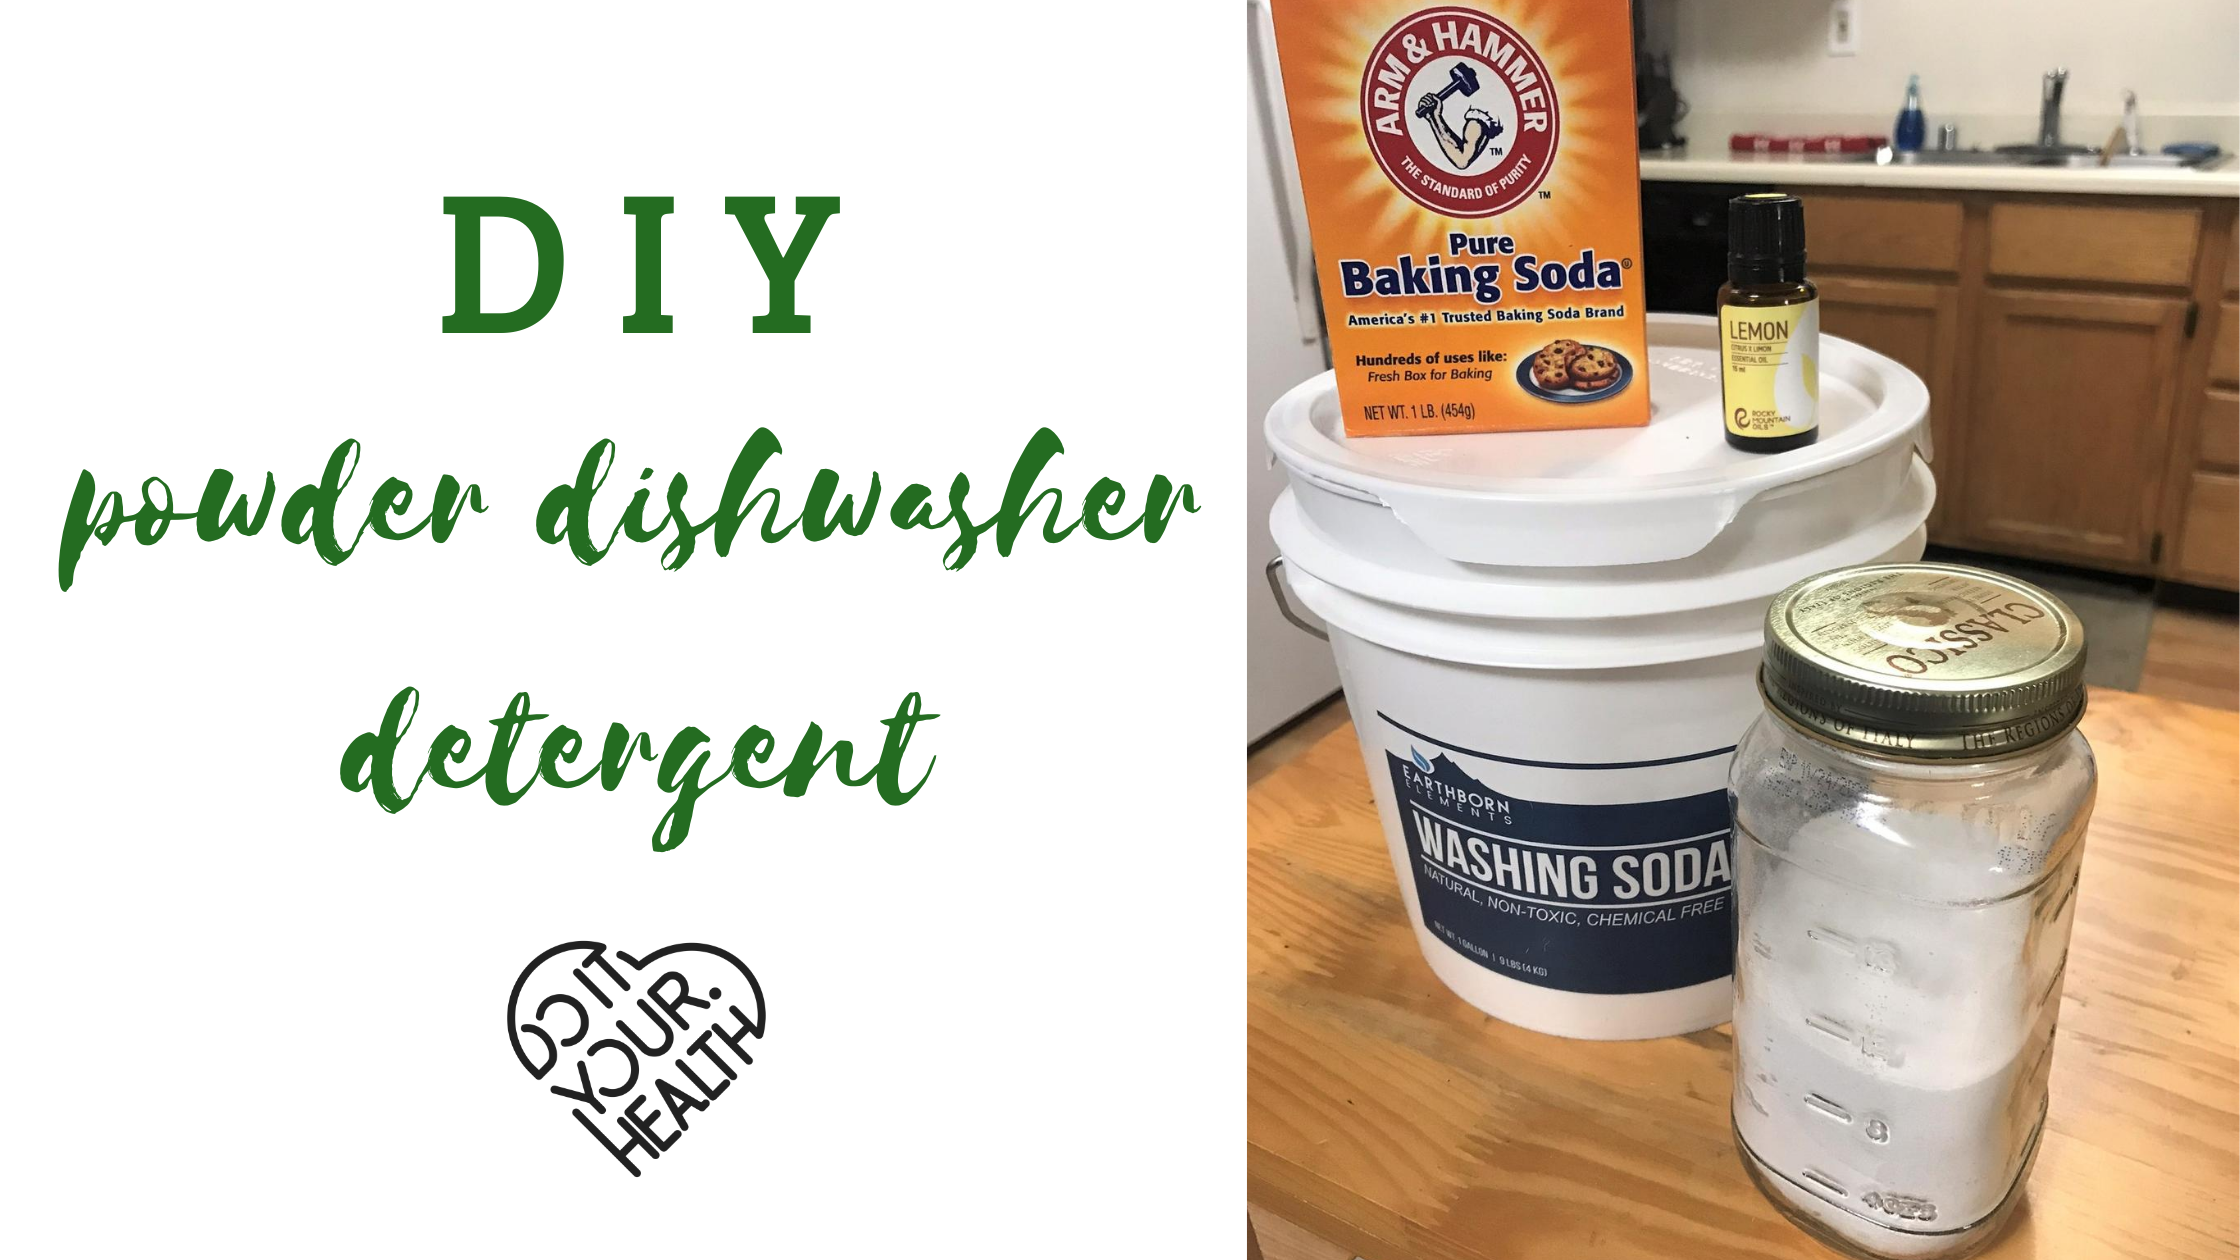 Large tubs of washing soda and baking soda have a long shelf-life, saving you more money over time. Use my Amazon Associate link for quick delivery on  washing soda  or  baking soda .